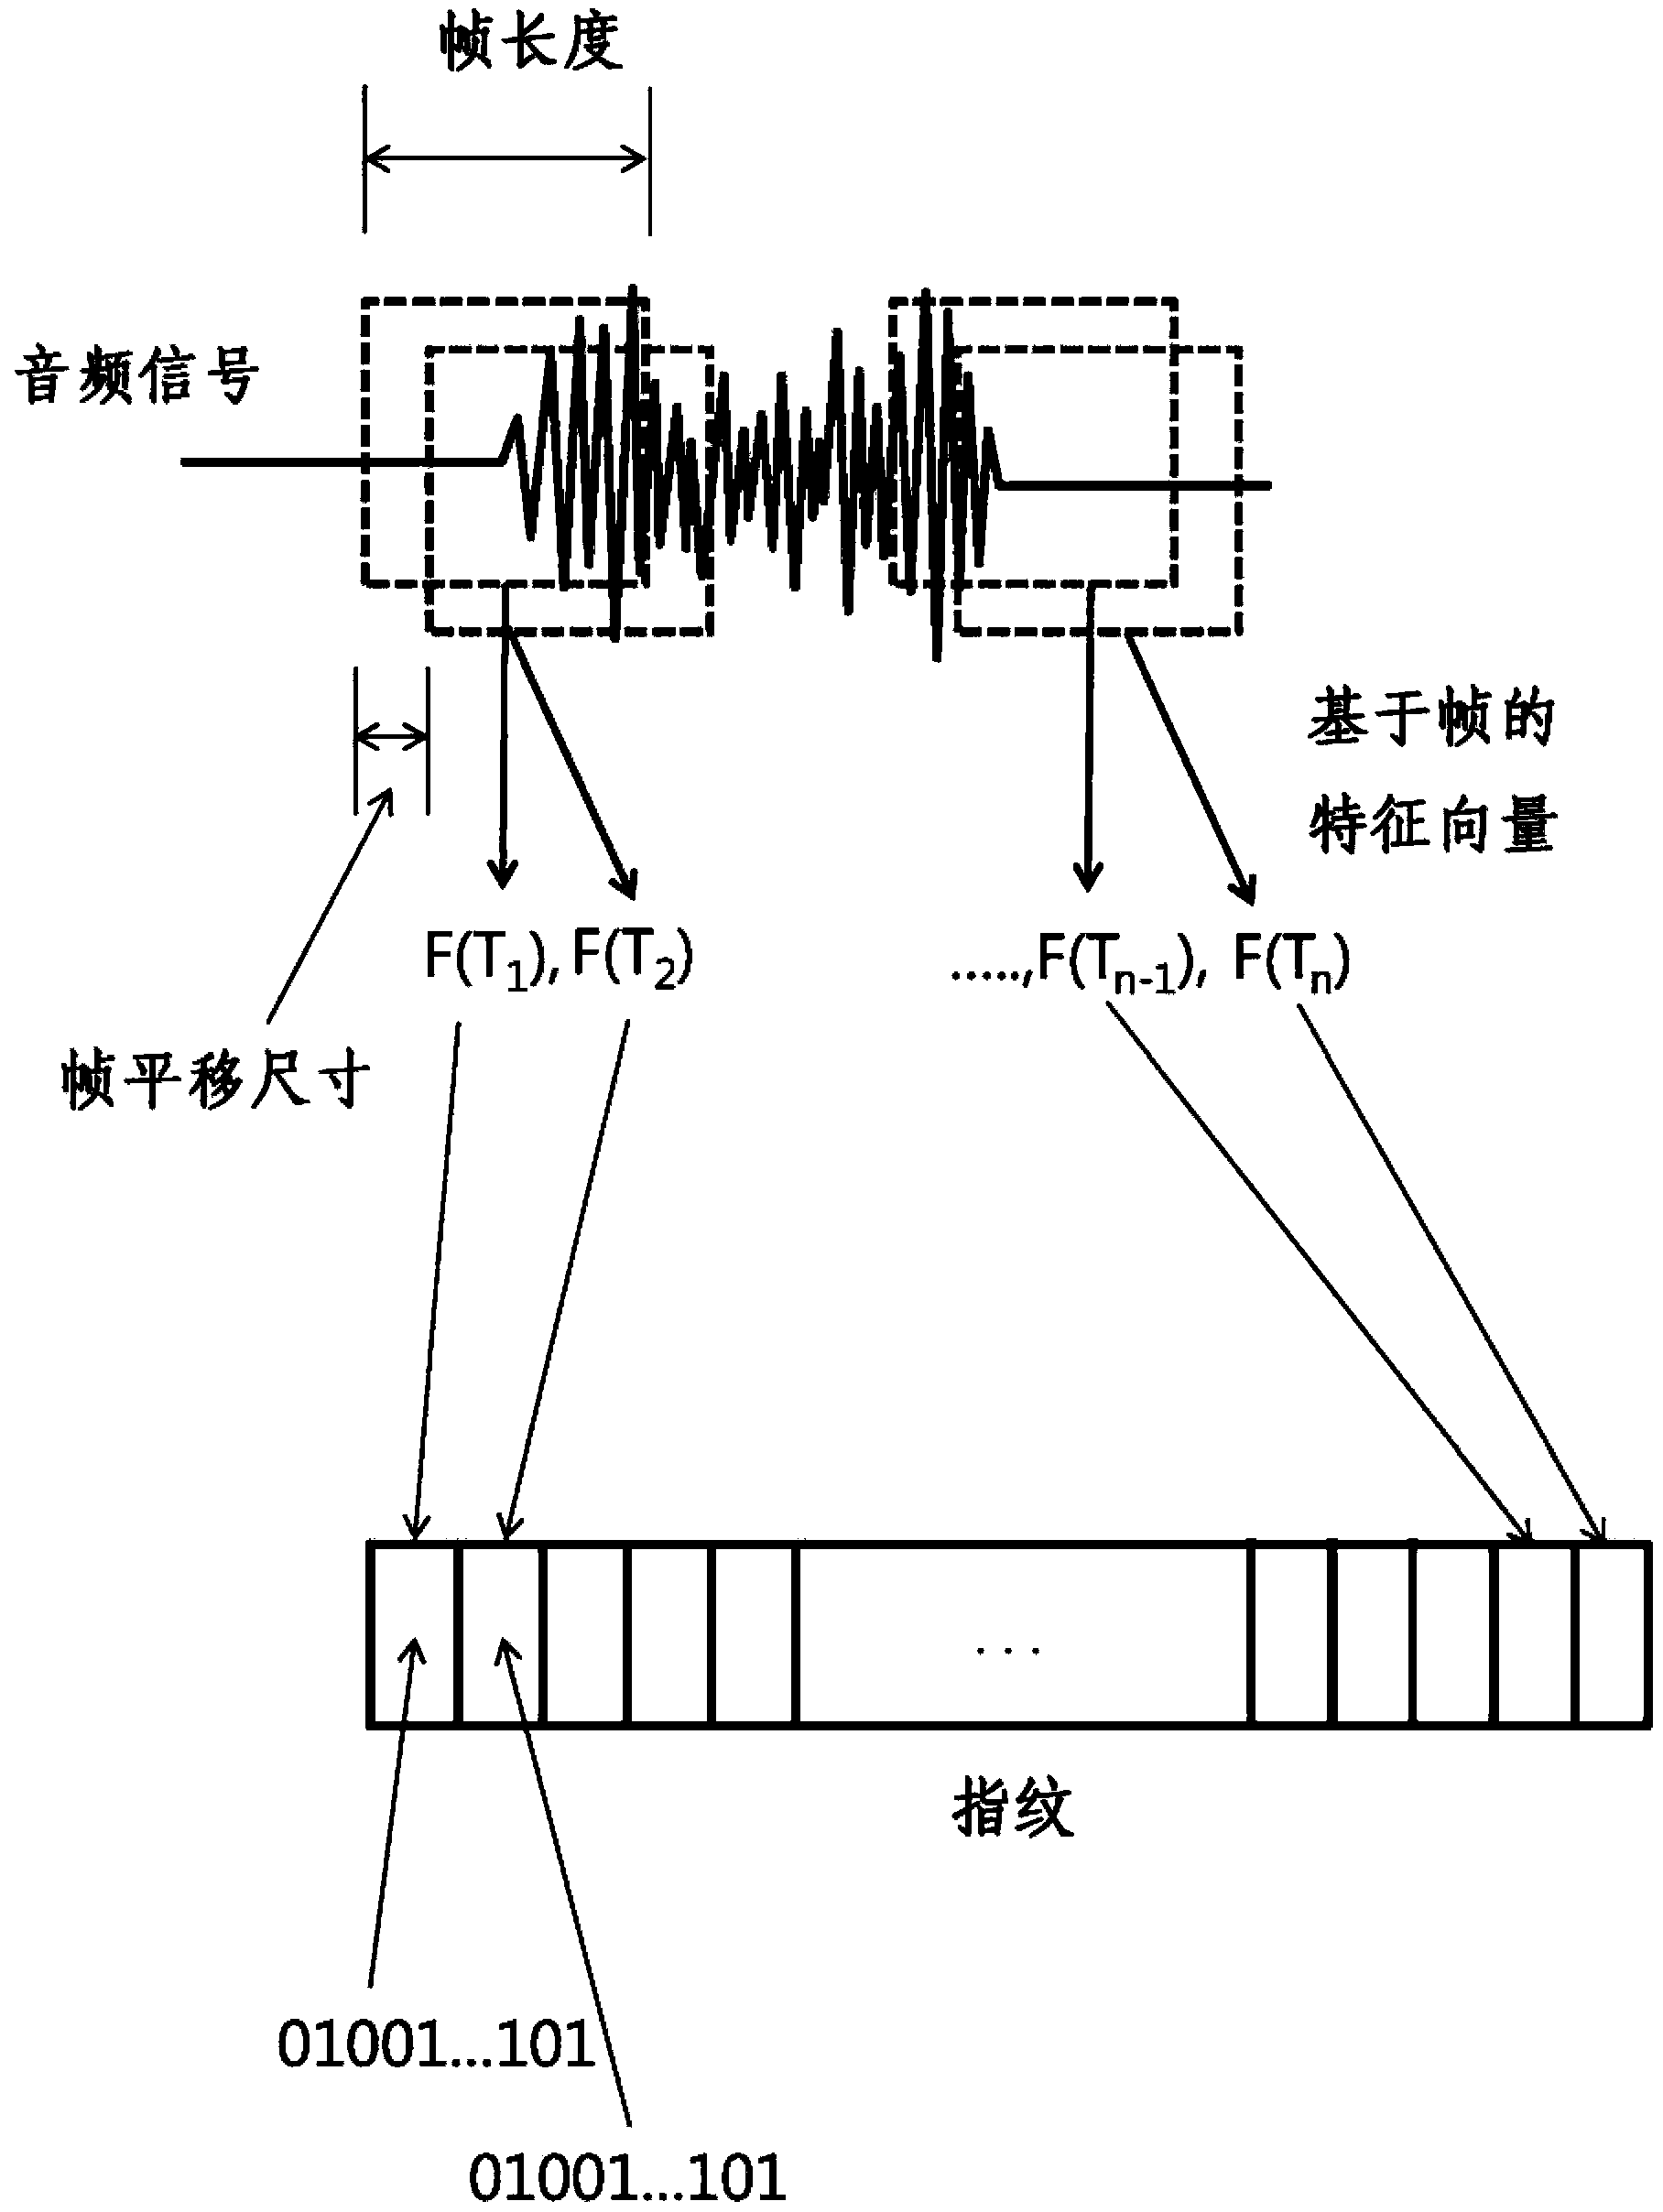 Device and method for recognizing content using audio signals